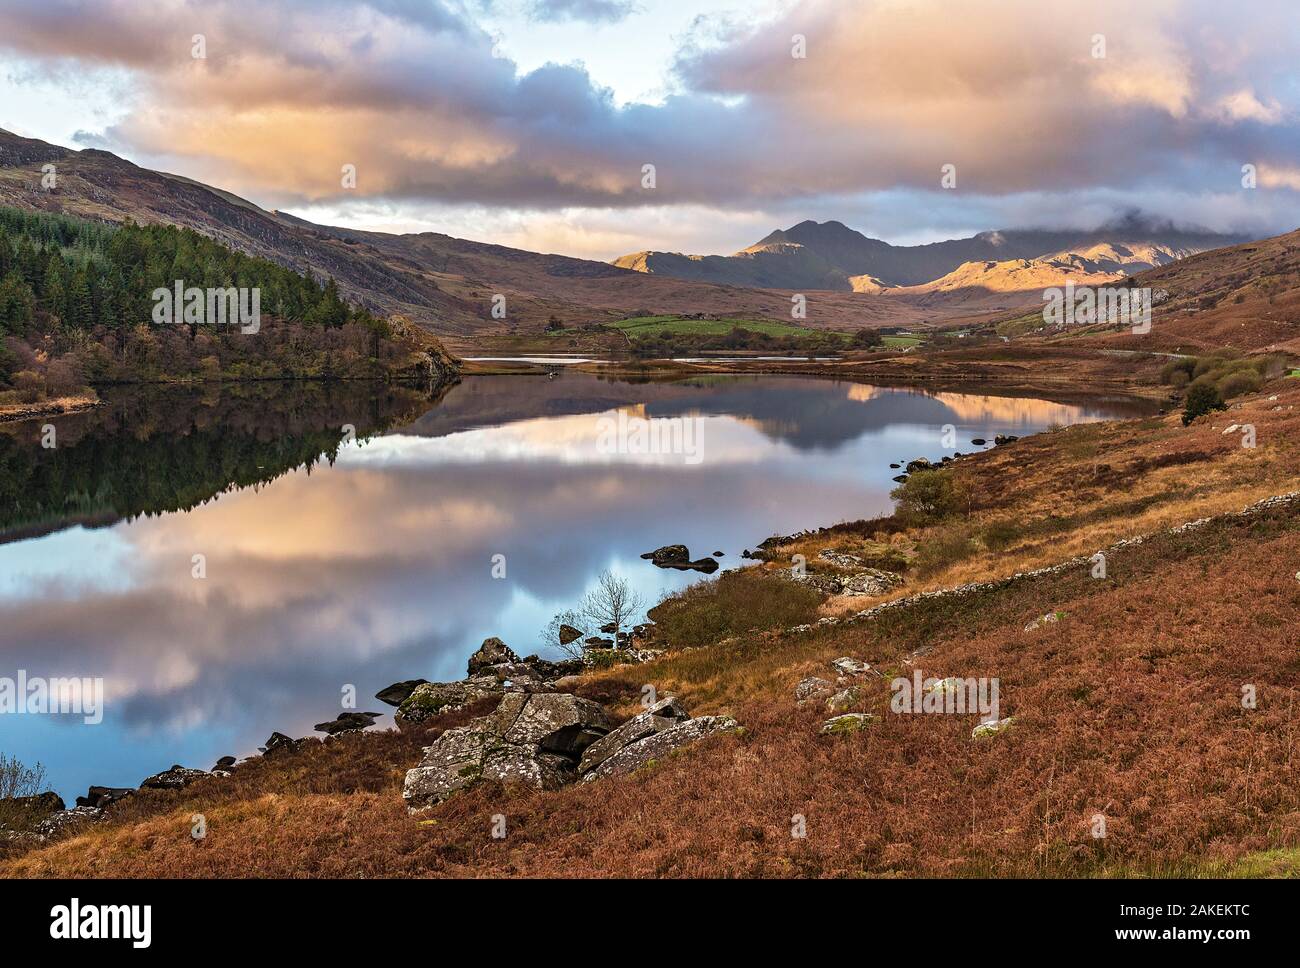 Llynnau Mymbr in early morning, view west towards cloud covered Mount Snowdon. Capel Curig, Snowdonia National Park, North Wales, UK. October 2017. Stock Photo